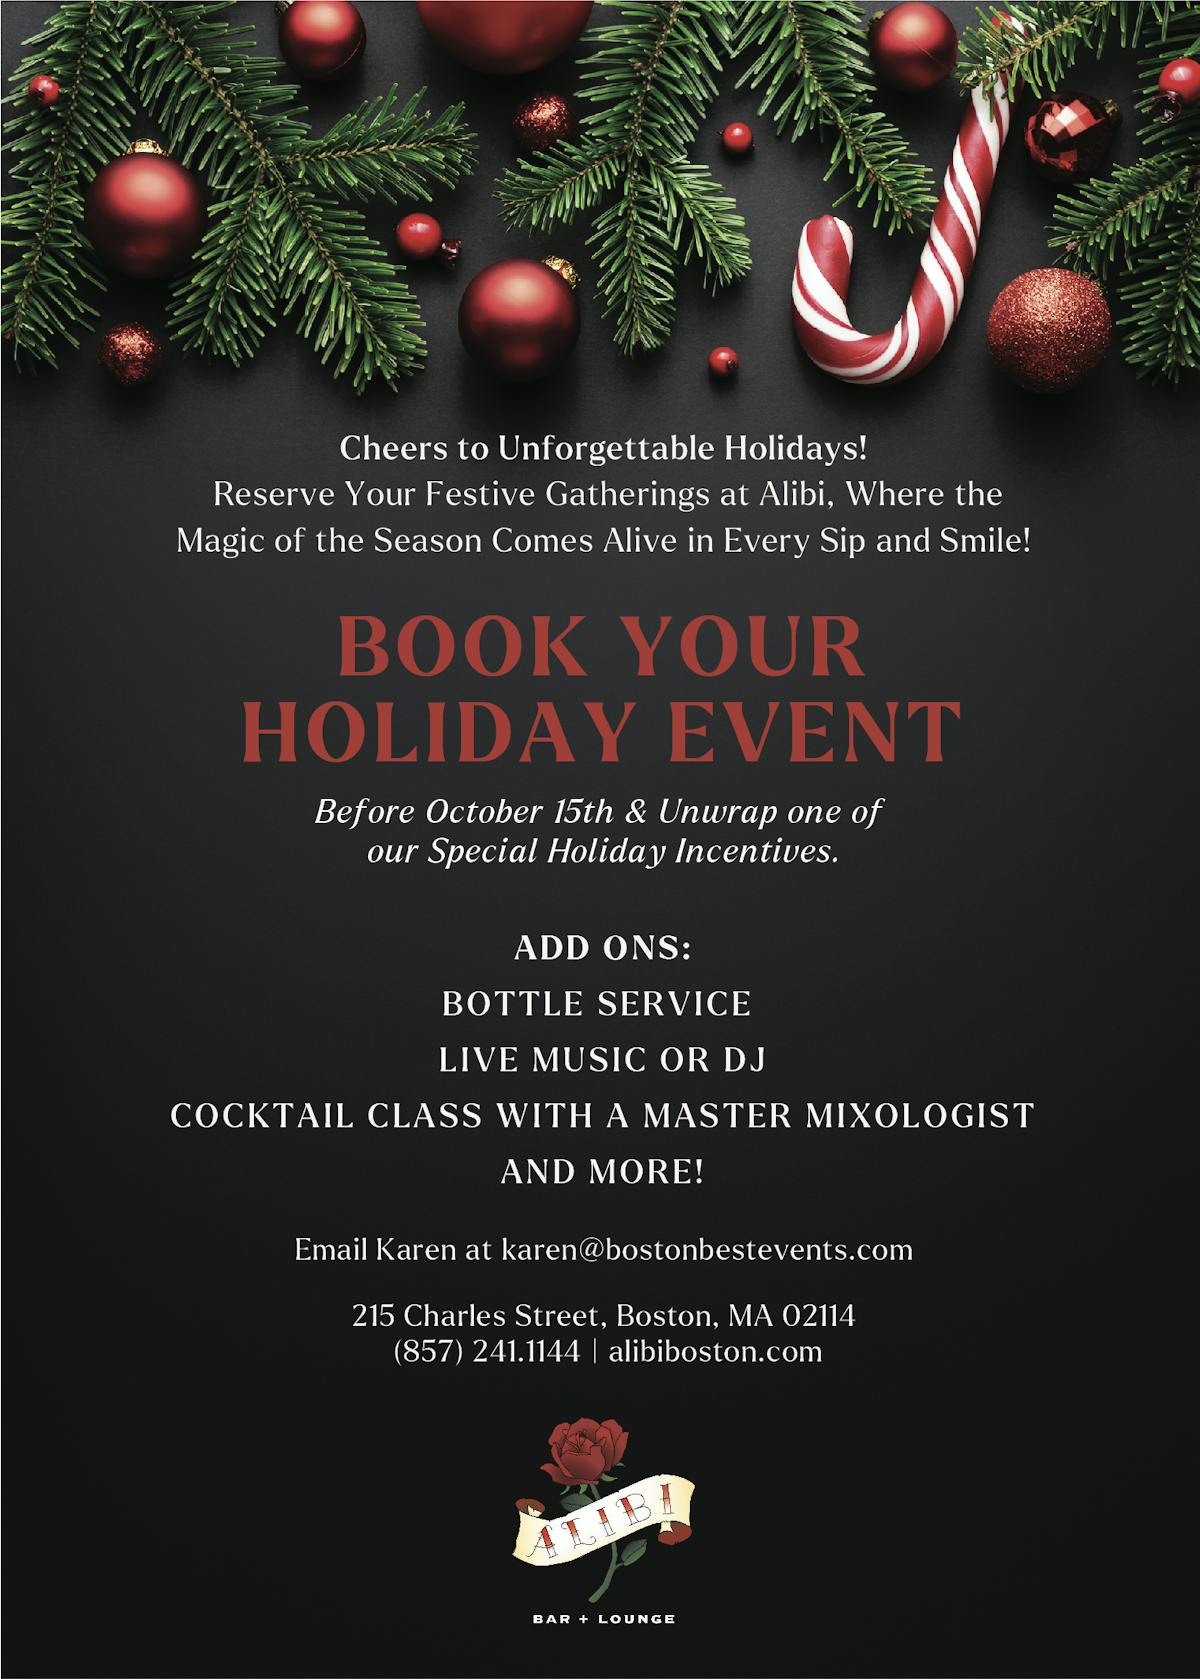 book your holiday party at alibi in boston, ma